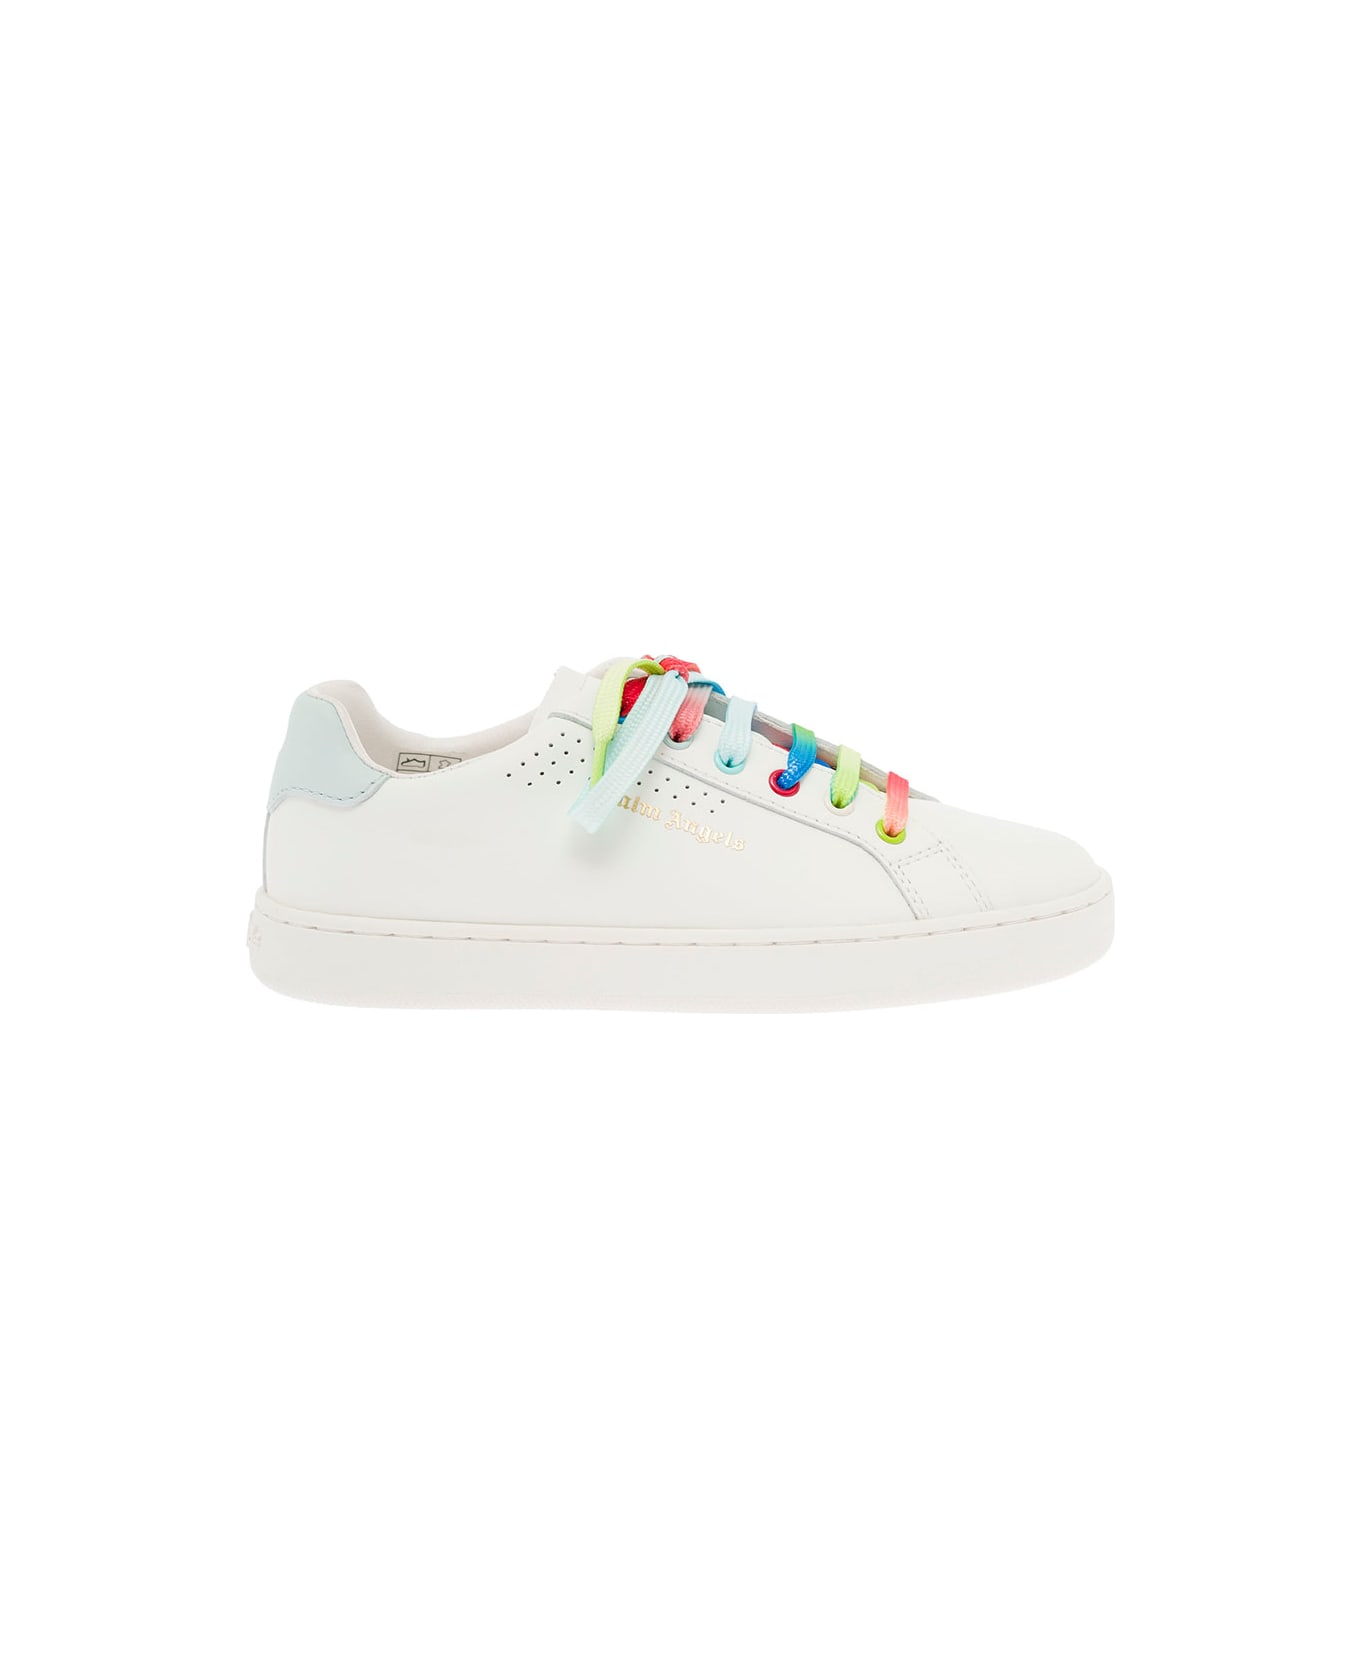 Palm Angels Kids Boy's White Leather Sneakers With Multicolor Laces - White